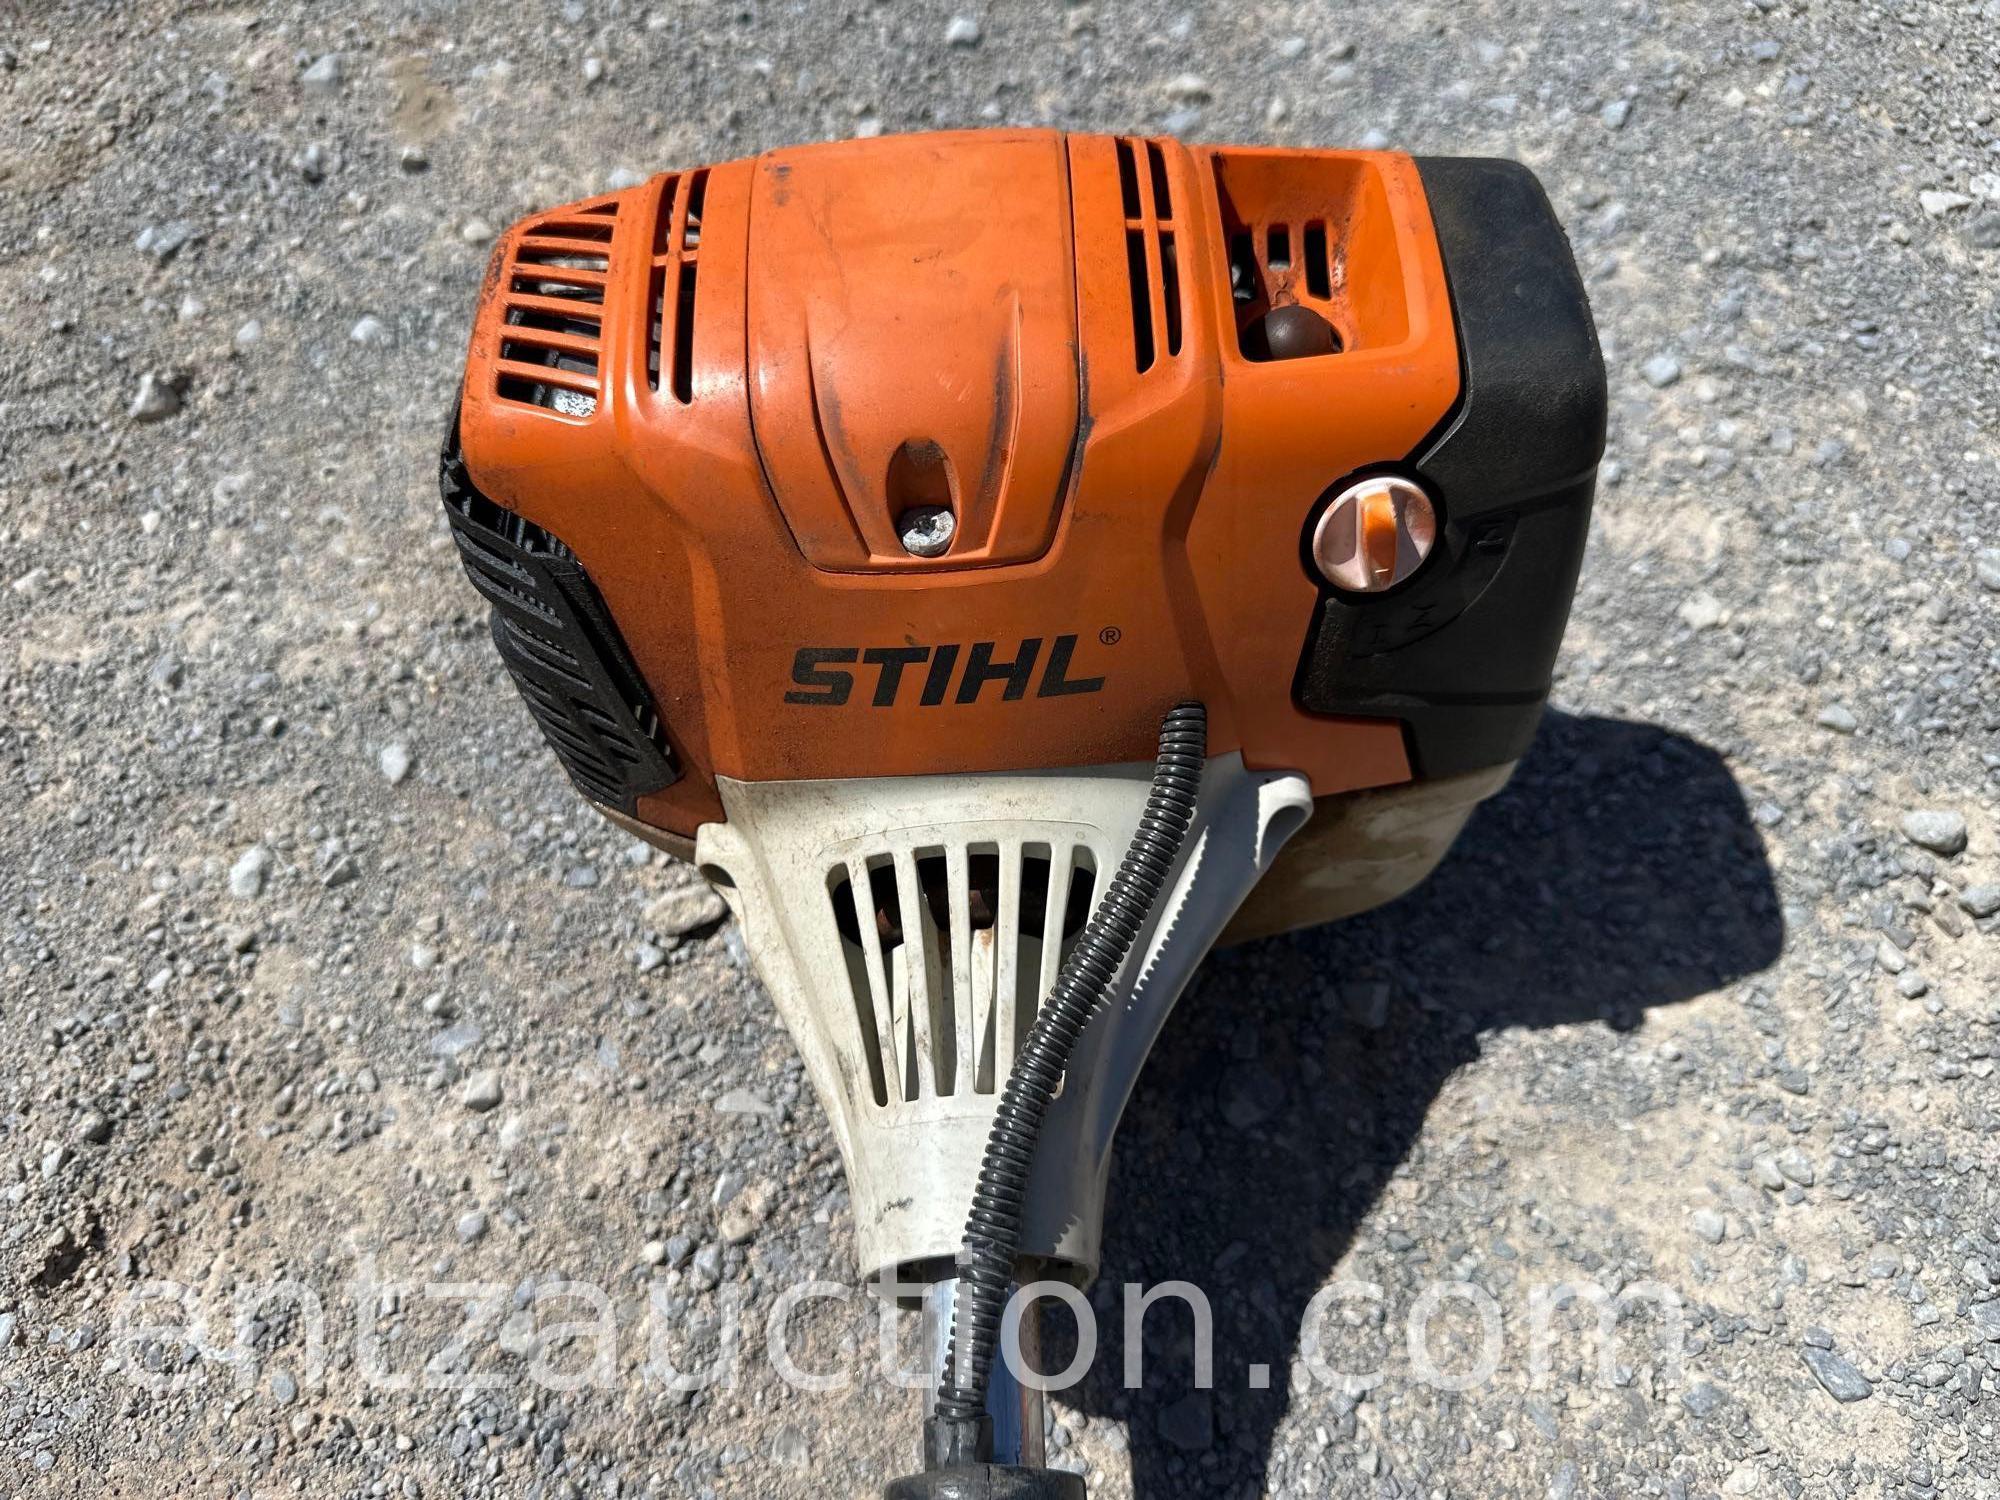 STIHL WEED EATER AND STIHL FS90 EDGER